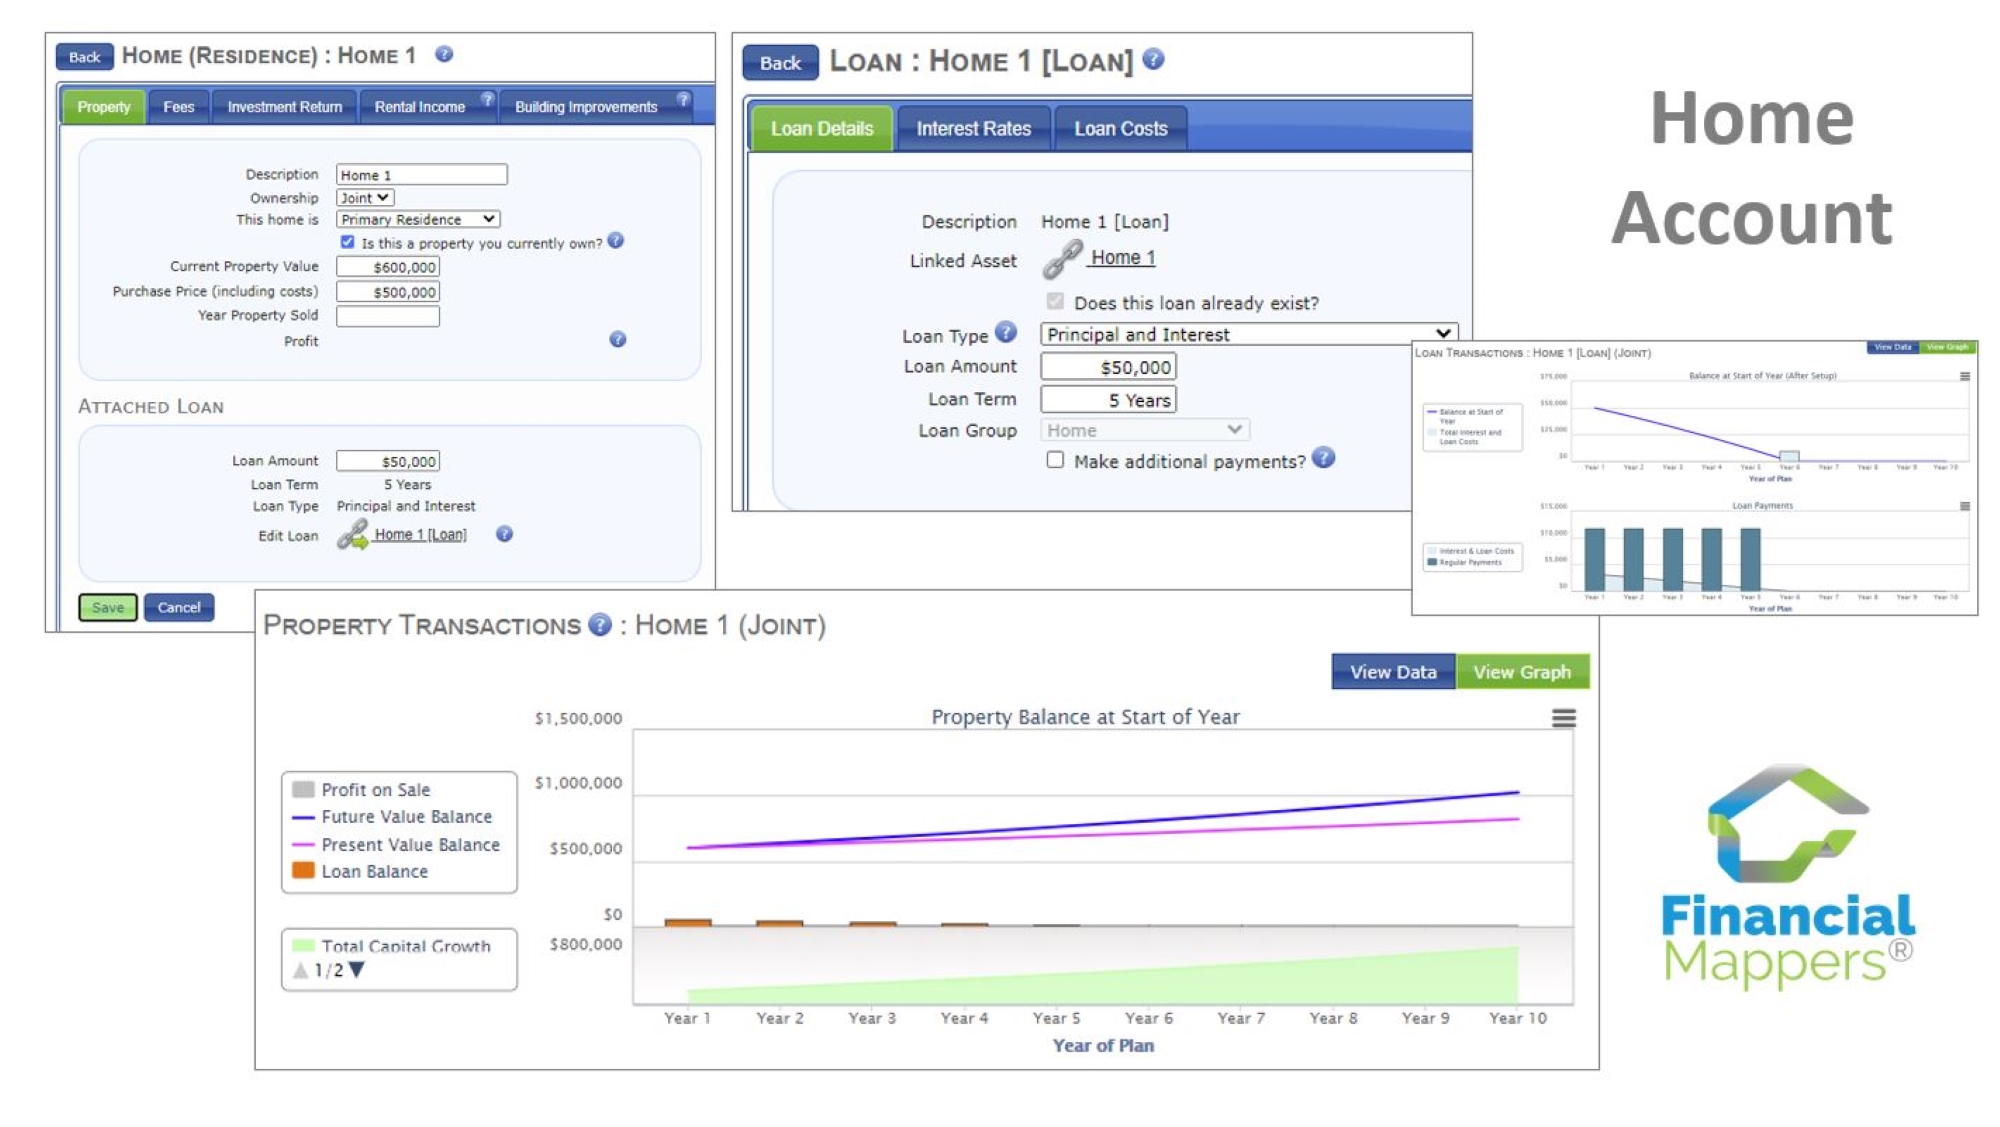 Add details of a Home Ownership and Home Loan to Financial Mappers which is cash flow modelling software for investors, Financial Advisers, Accountants and Mortgage Brokers.